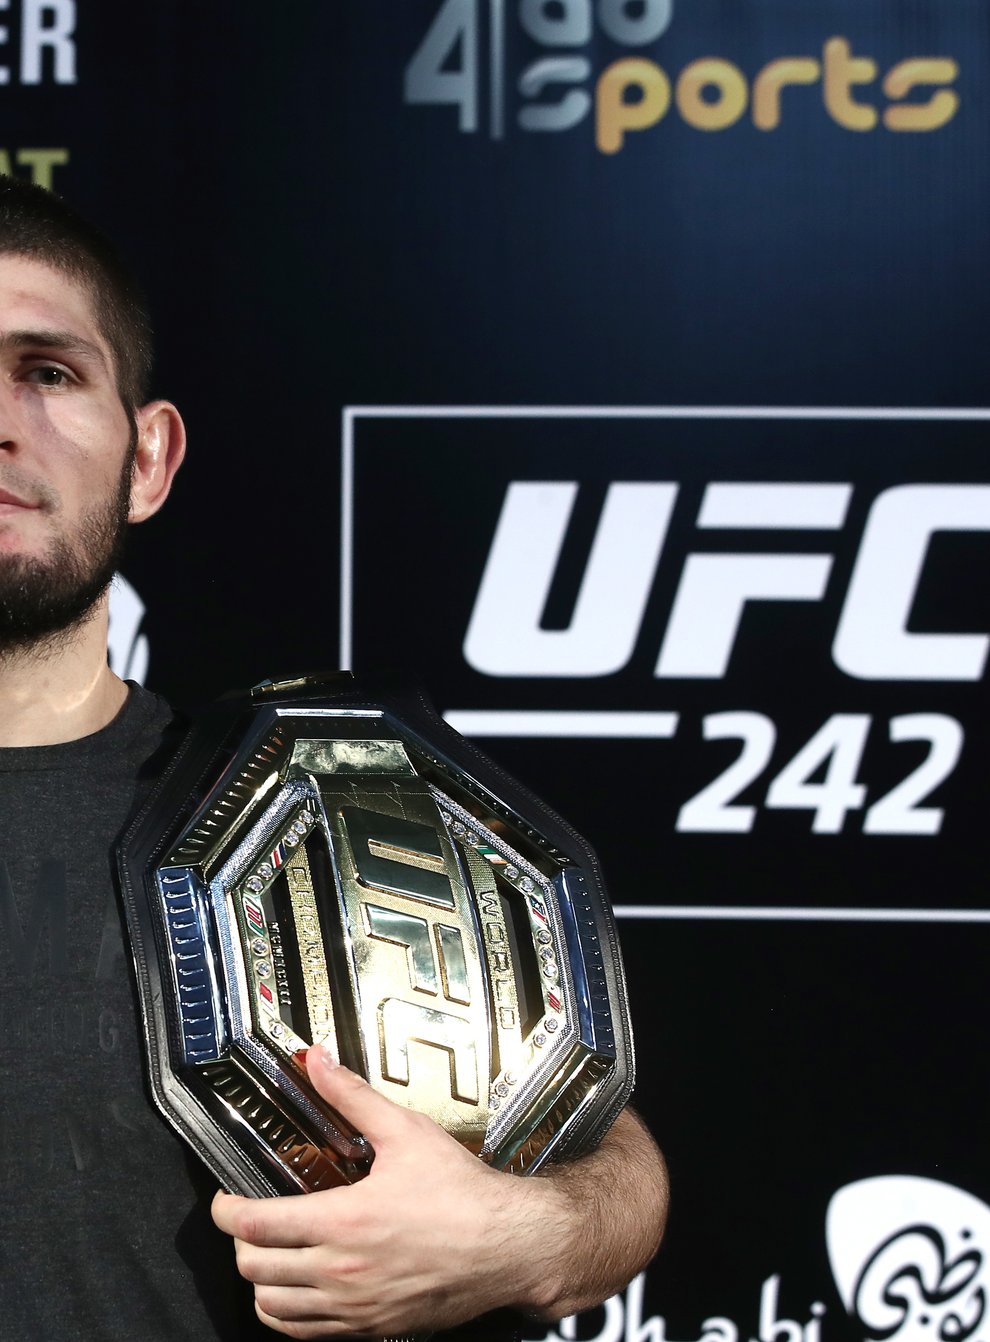 <p>Khabib moved to 29-0 as a professional MMA fighter this year</p>